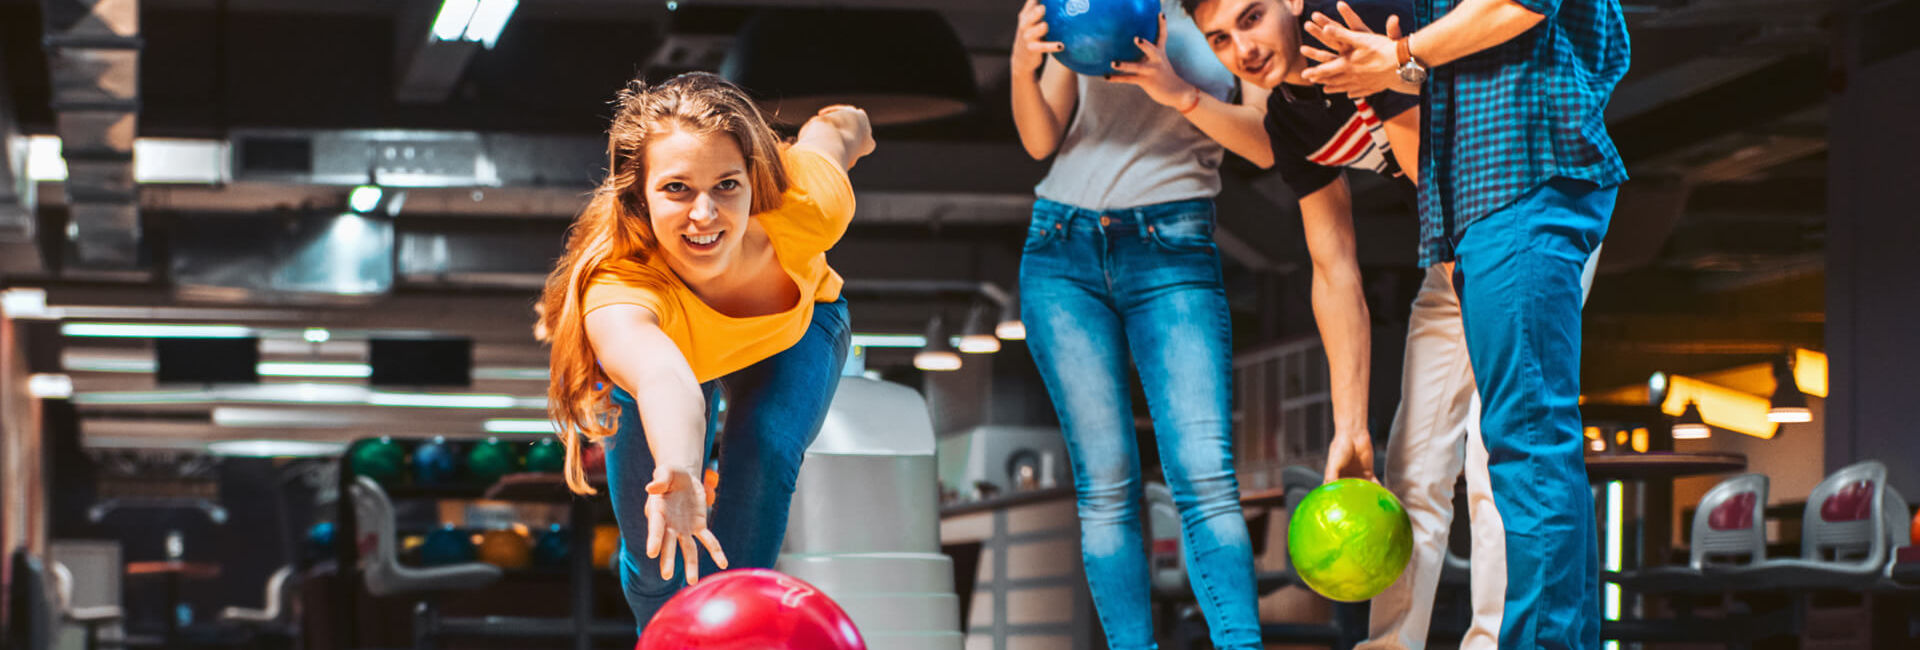 Young girl bowling with friends